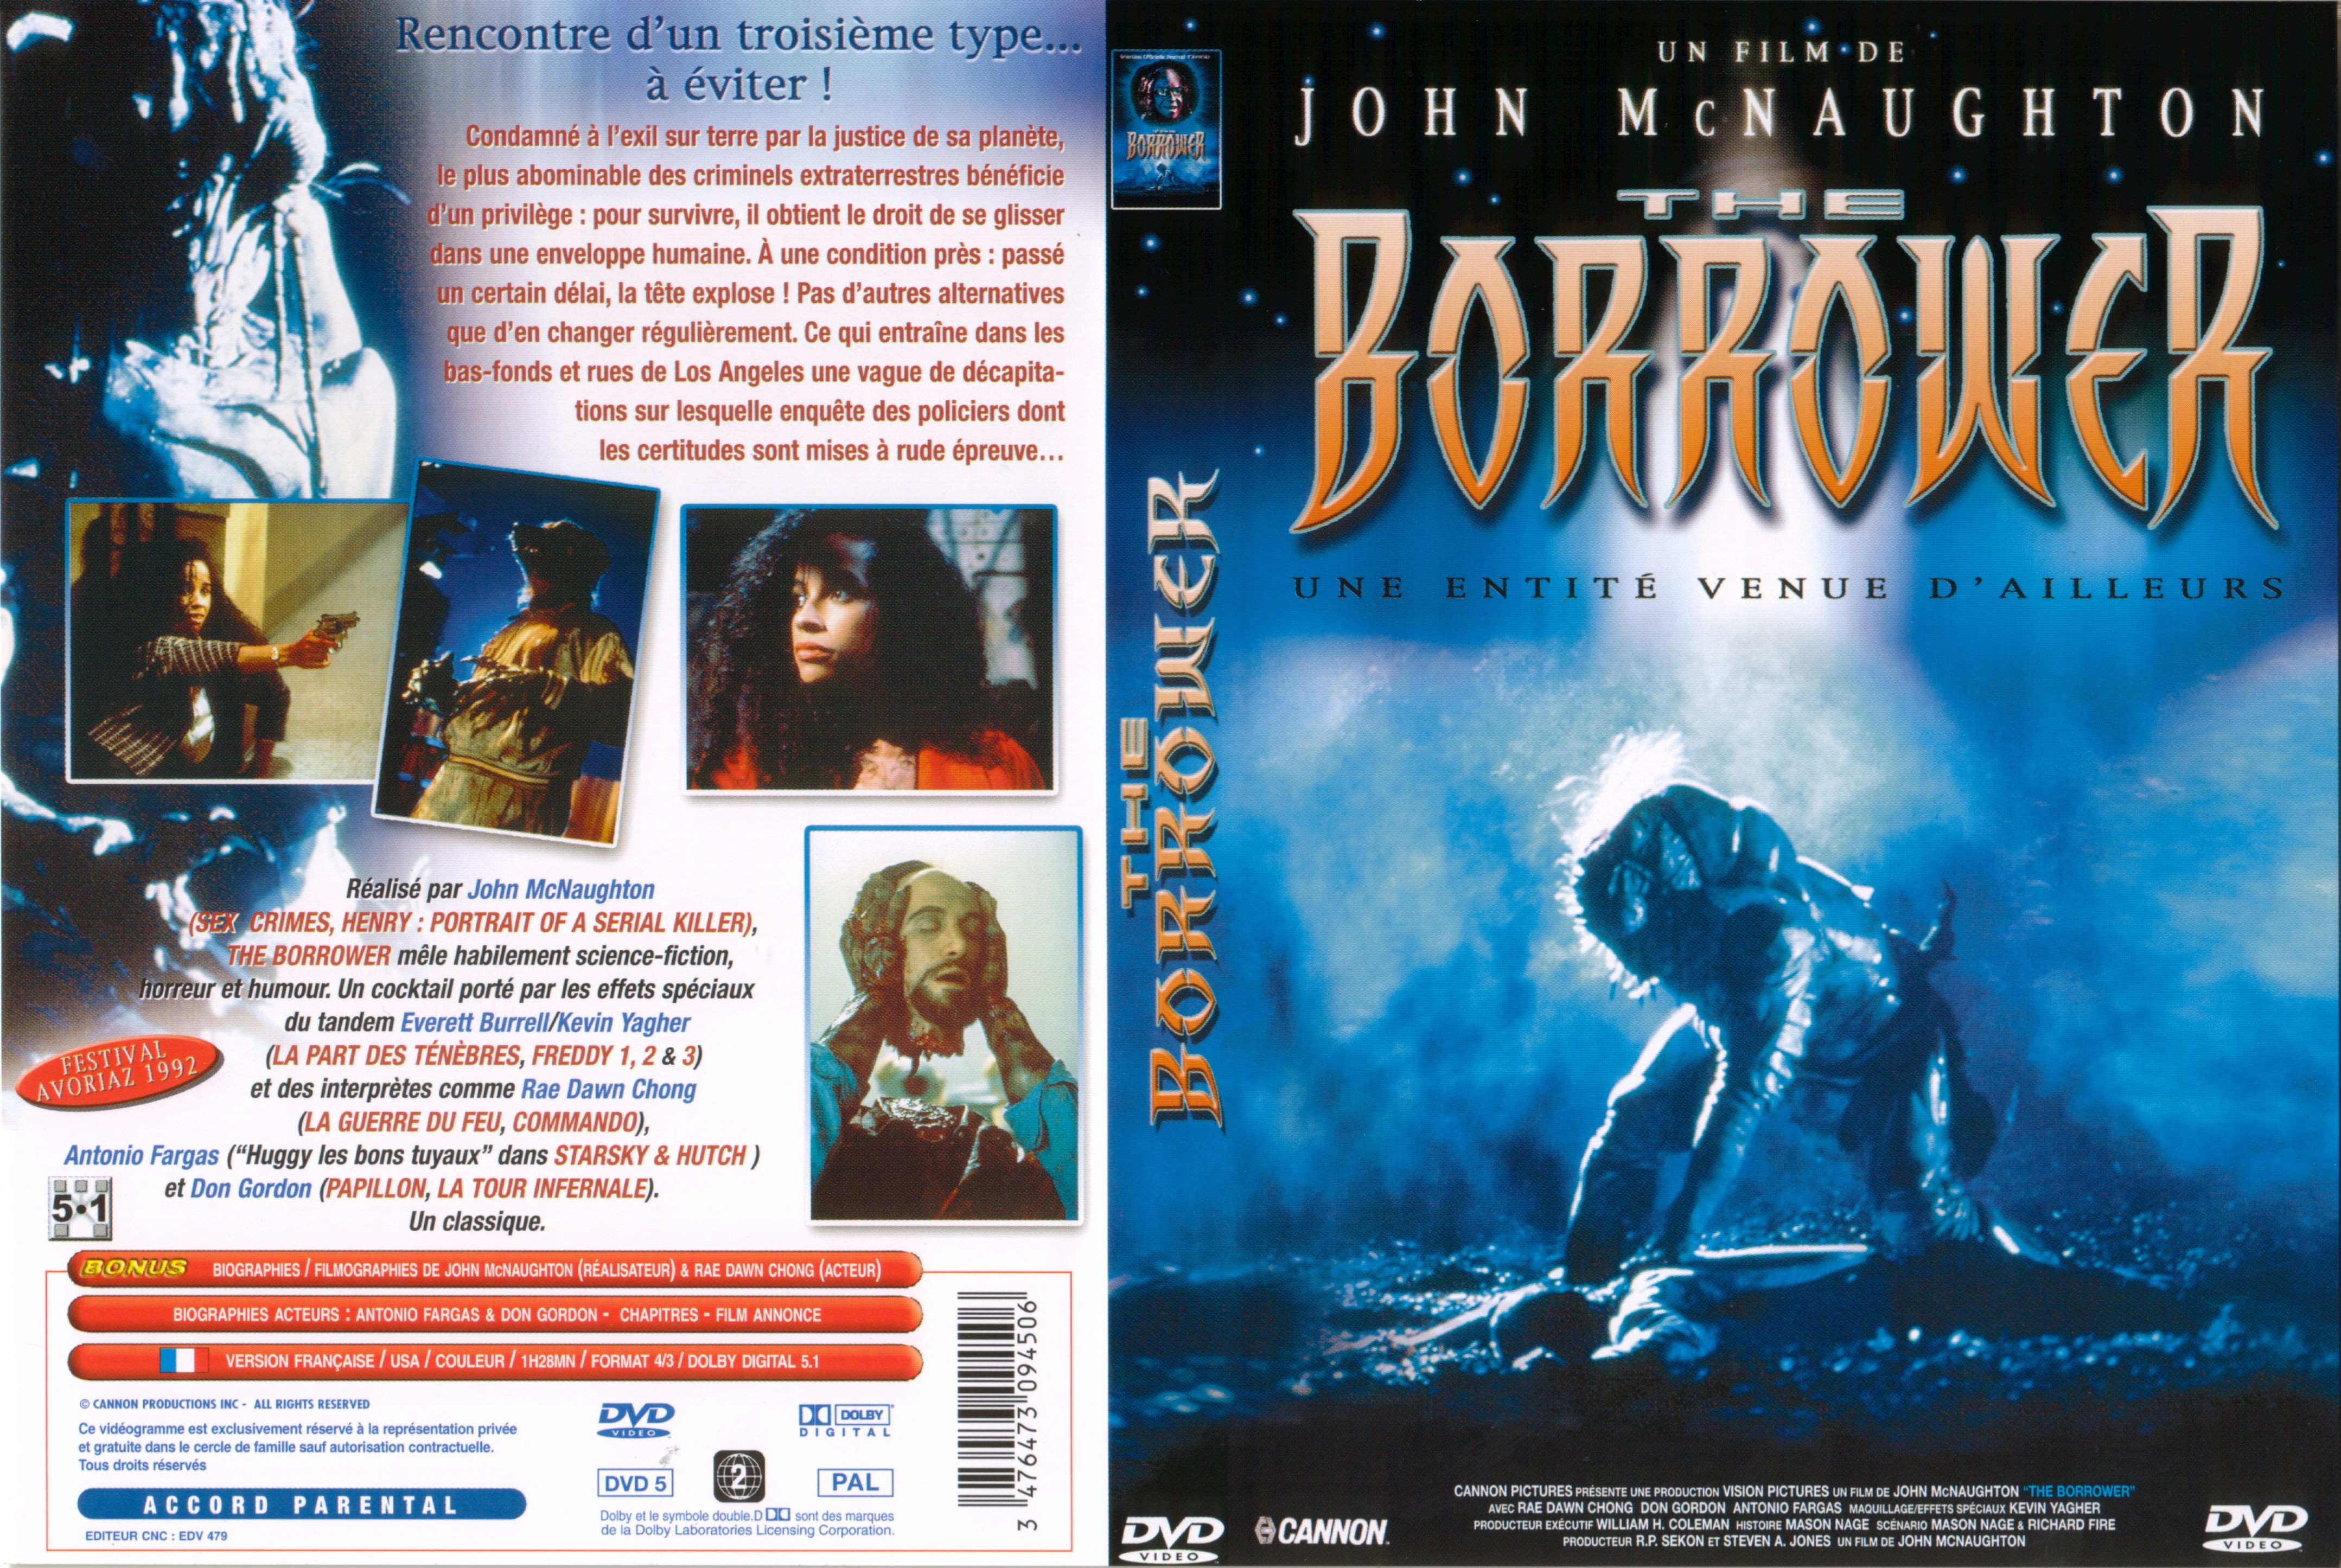 Jaquette DVD The borrower